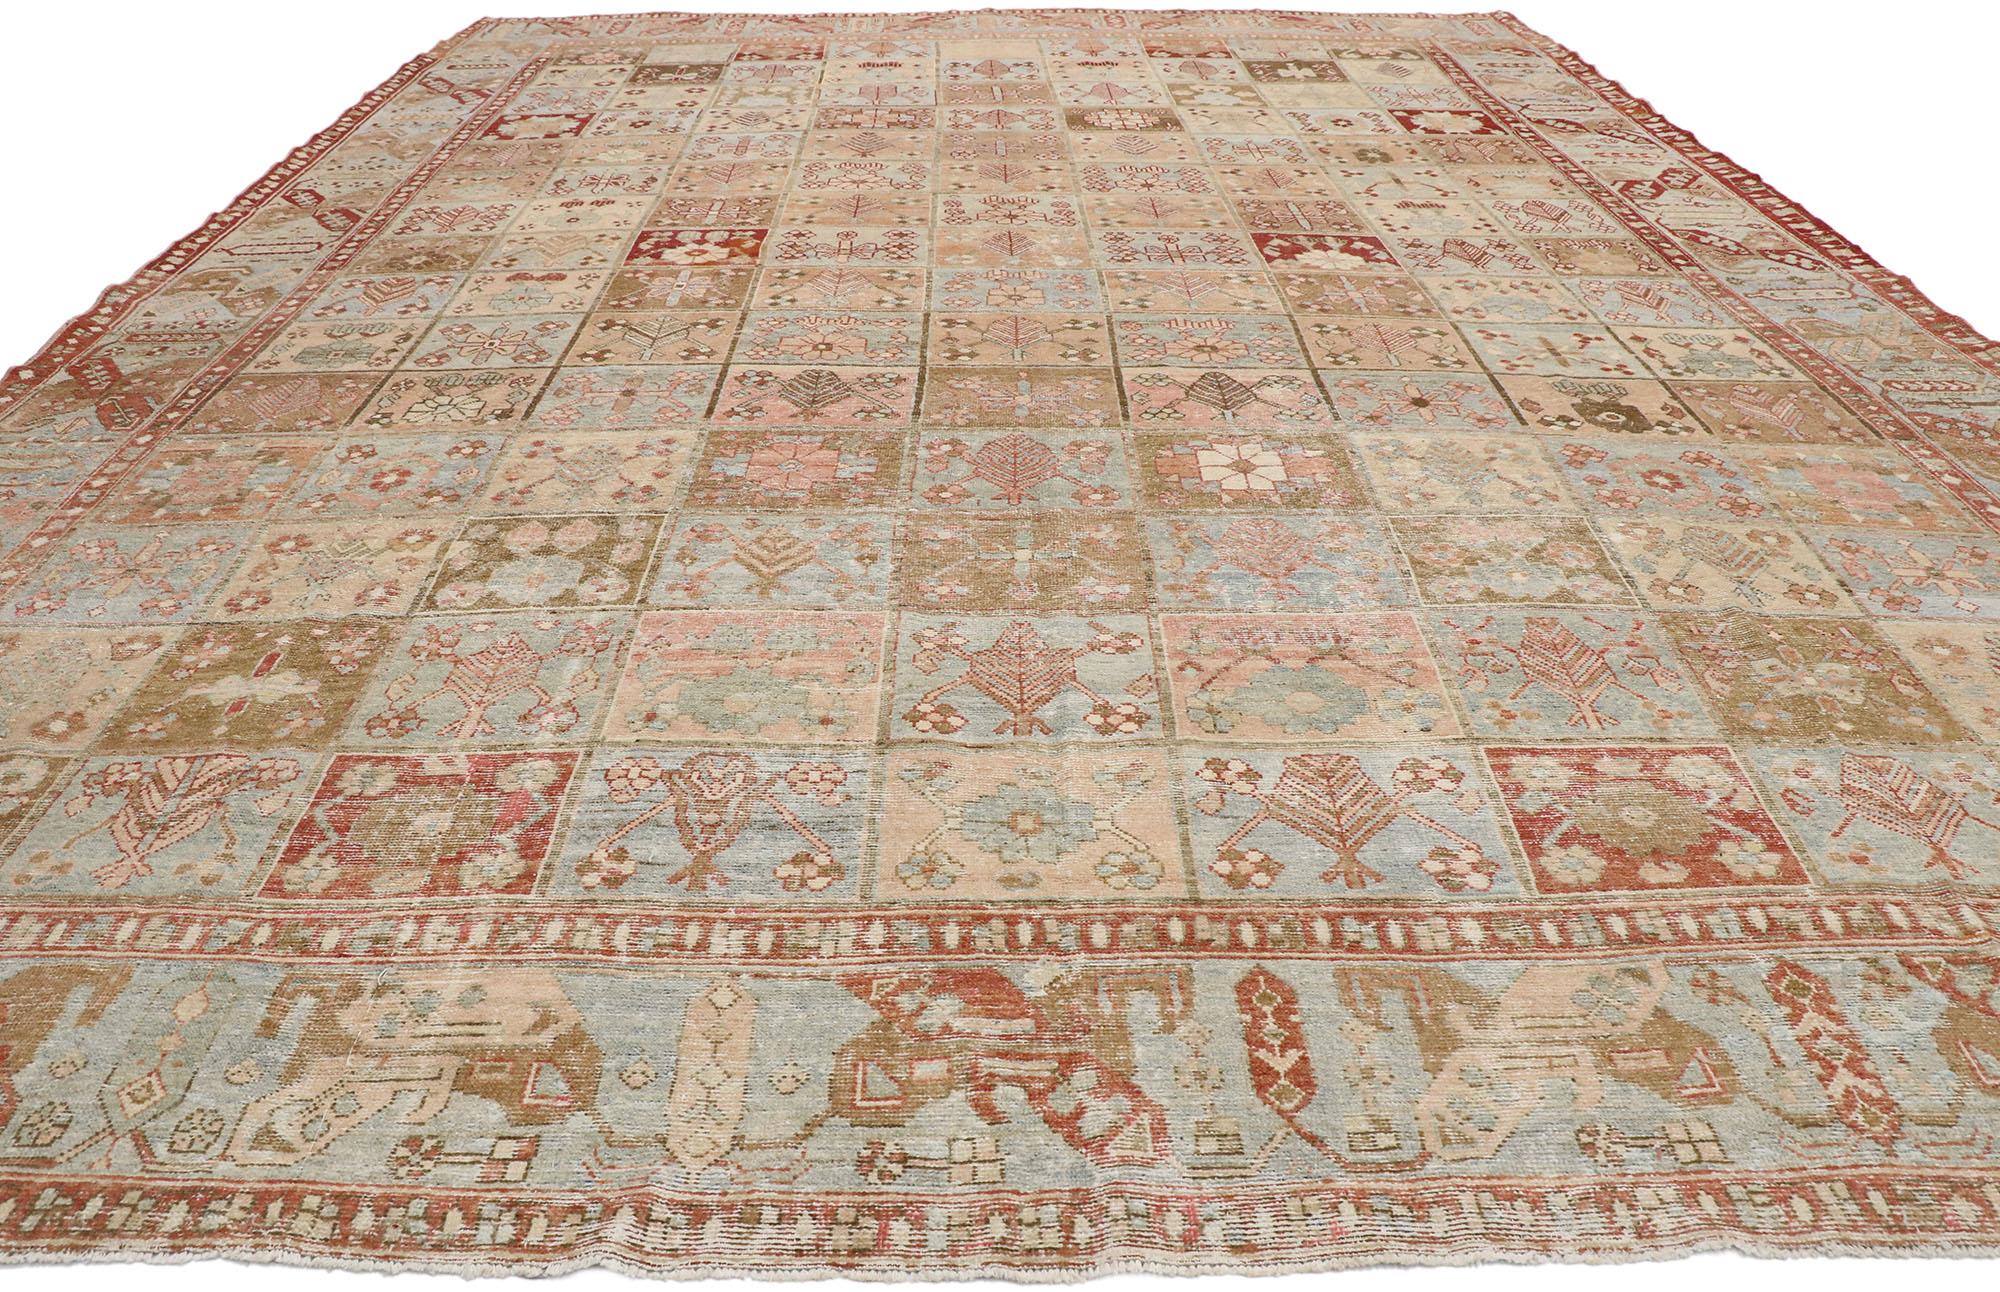 French Provincial Distressed Antique Persian Bakhtiari Rug with Modern French Rustic Style